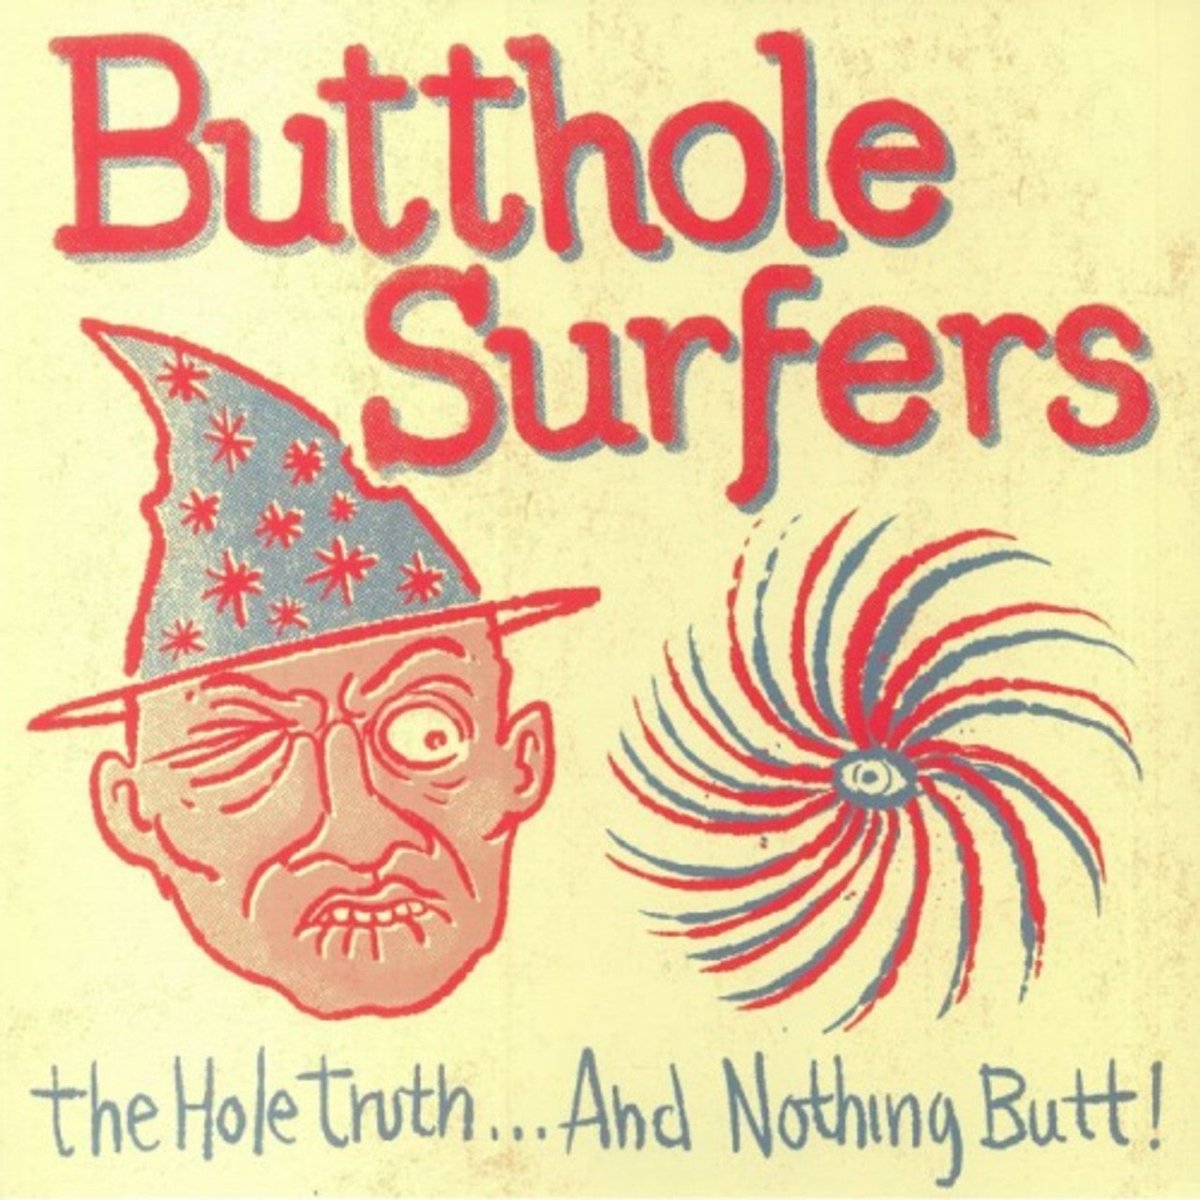 Butthole Surfers – The Hole Truth... And Nothing Butt! Vinyl